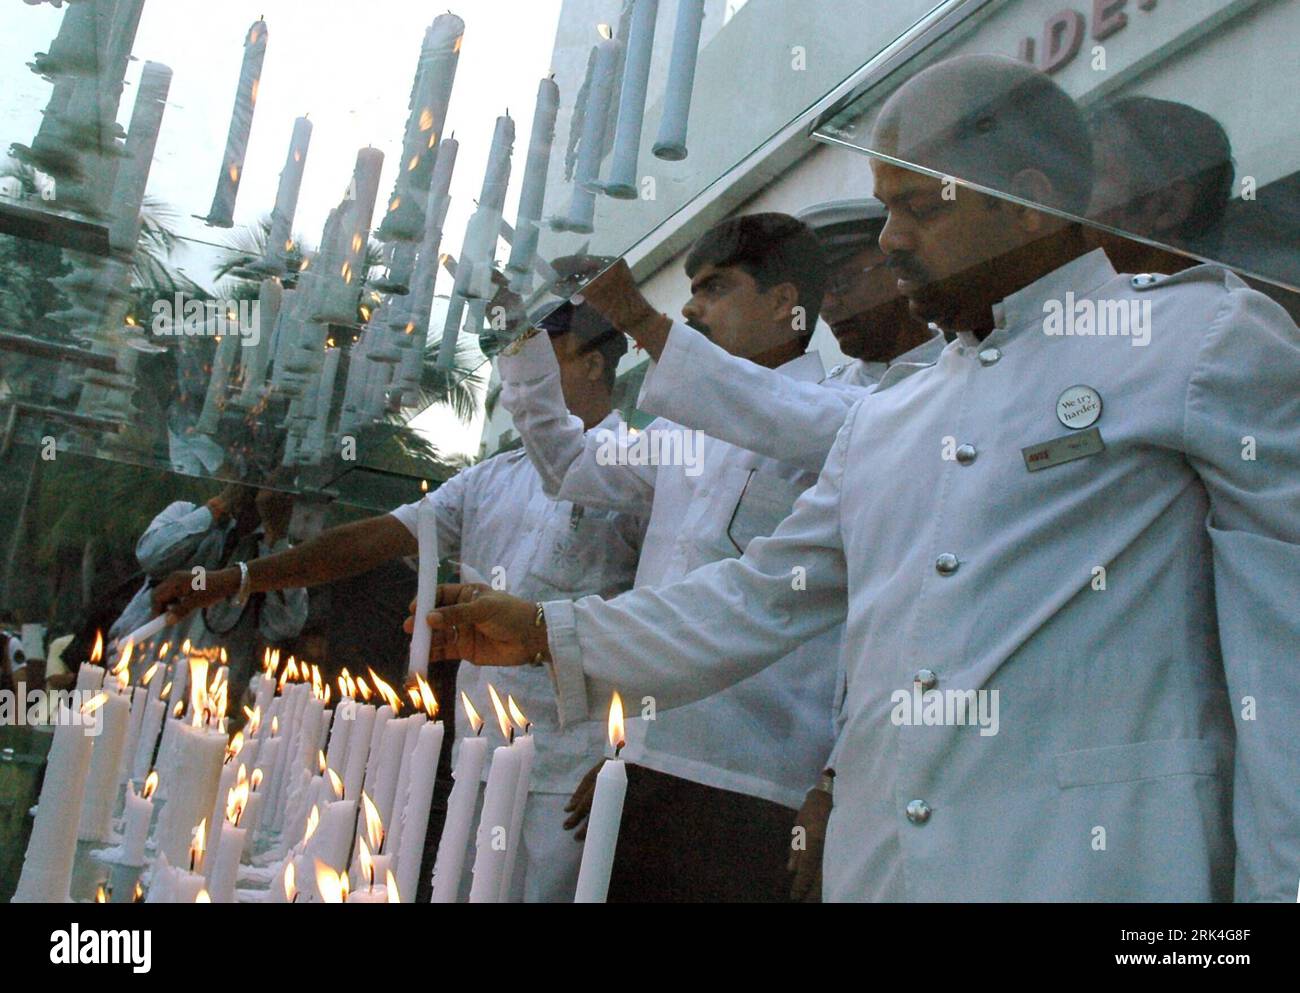 Bildnummer: 53628523  Datum: 26.11.2009  Copyright: imago/Xinhua (091126) -- MUMBAI, Nov. 26, 2009 (Xinhua) -- Staff members of Oberoi Trident hotel light candles to honor victims in front of Oberoi Trident hotel, one of the sites of last year s terror attacks, in Mumbai city of India, Nov. 26, 2009. India marked the first anniversary of the 2008 terrorist attacks on Mumbai on Thursday. (Xinhua) (zcq) (3)INDIA-MUMBAI-VICTIMS-ANNIVERSARY PUBLICATIONxNOTxINxCHN Trauer Gedenken Opfer Mumbai Jahrestag kbdig xcb 2009 quer  o0 Kerze    Bildnummer 53628523 Date 26 11 2009 Copyright Imago XINHUA  Mumb Stock Photo